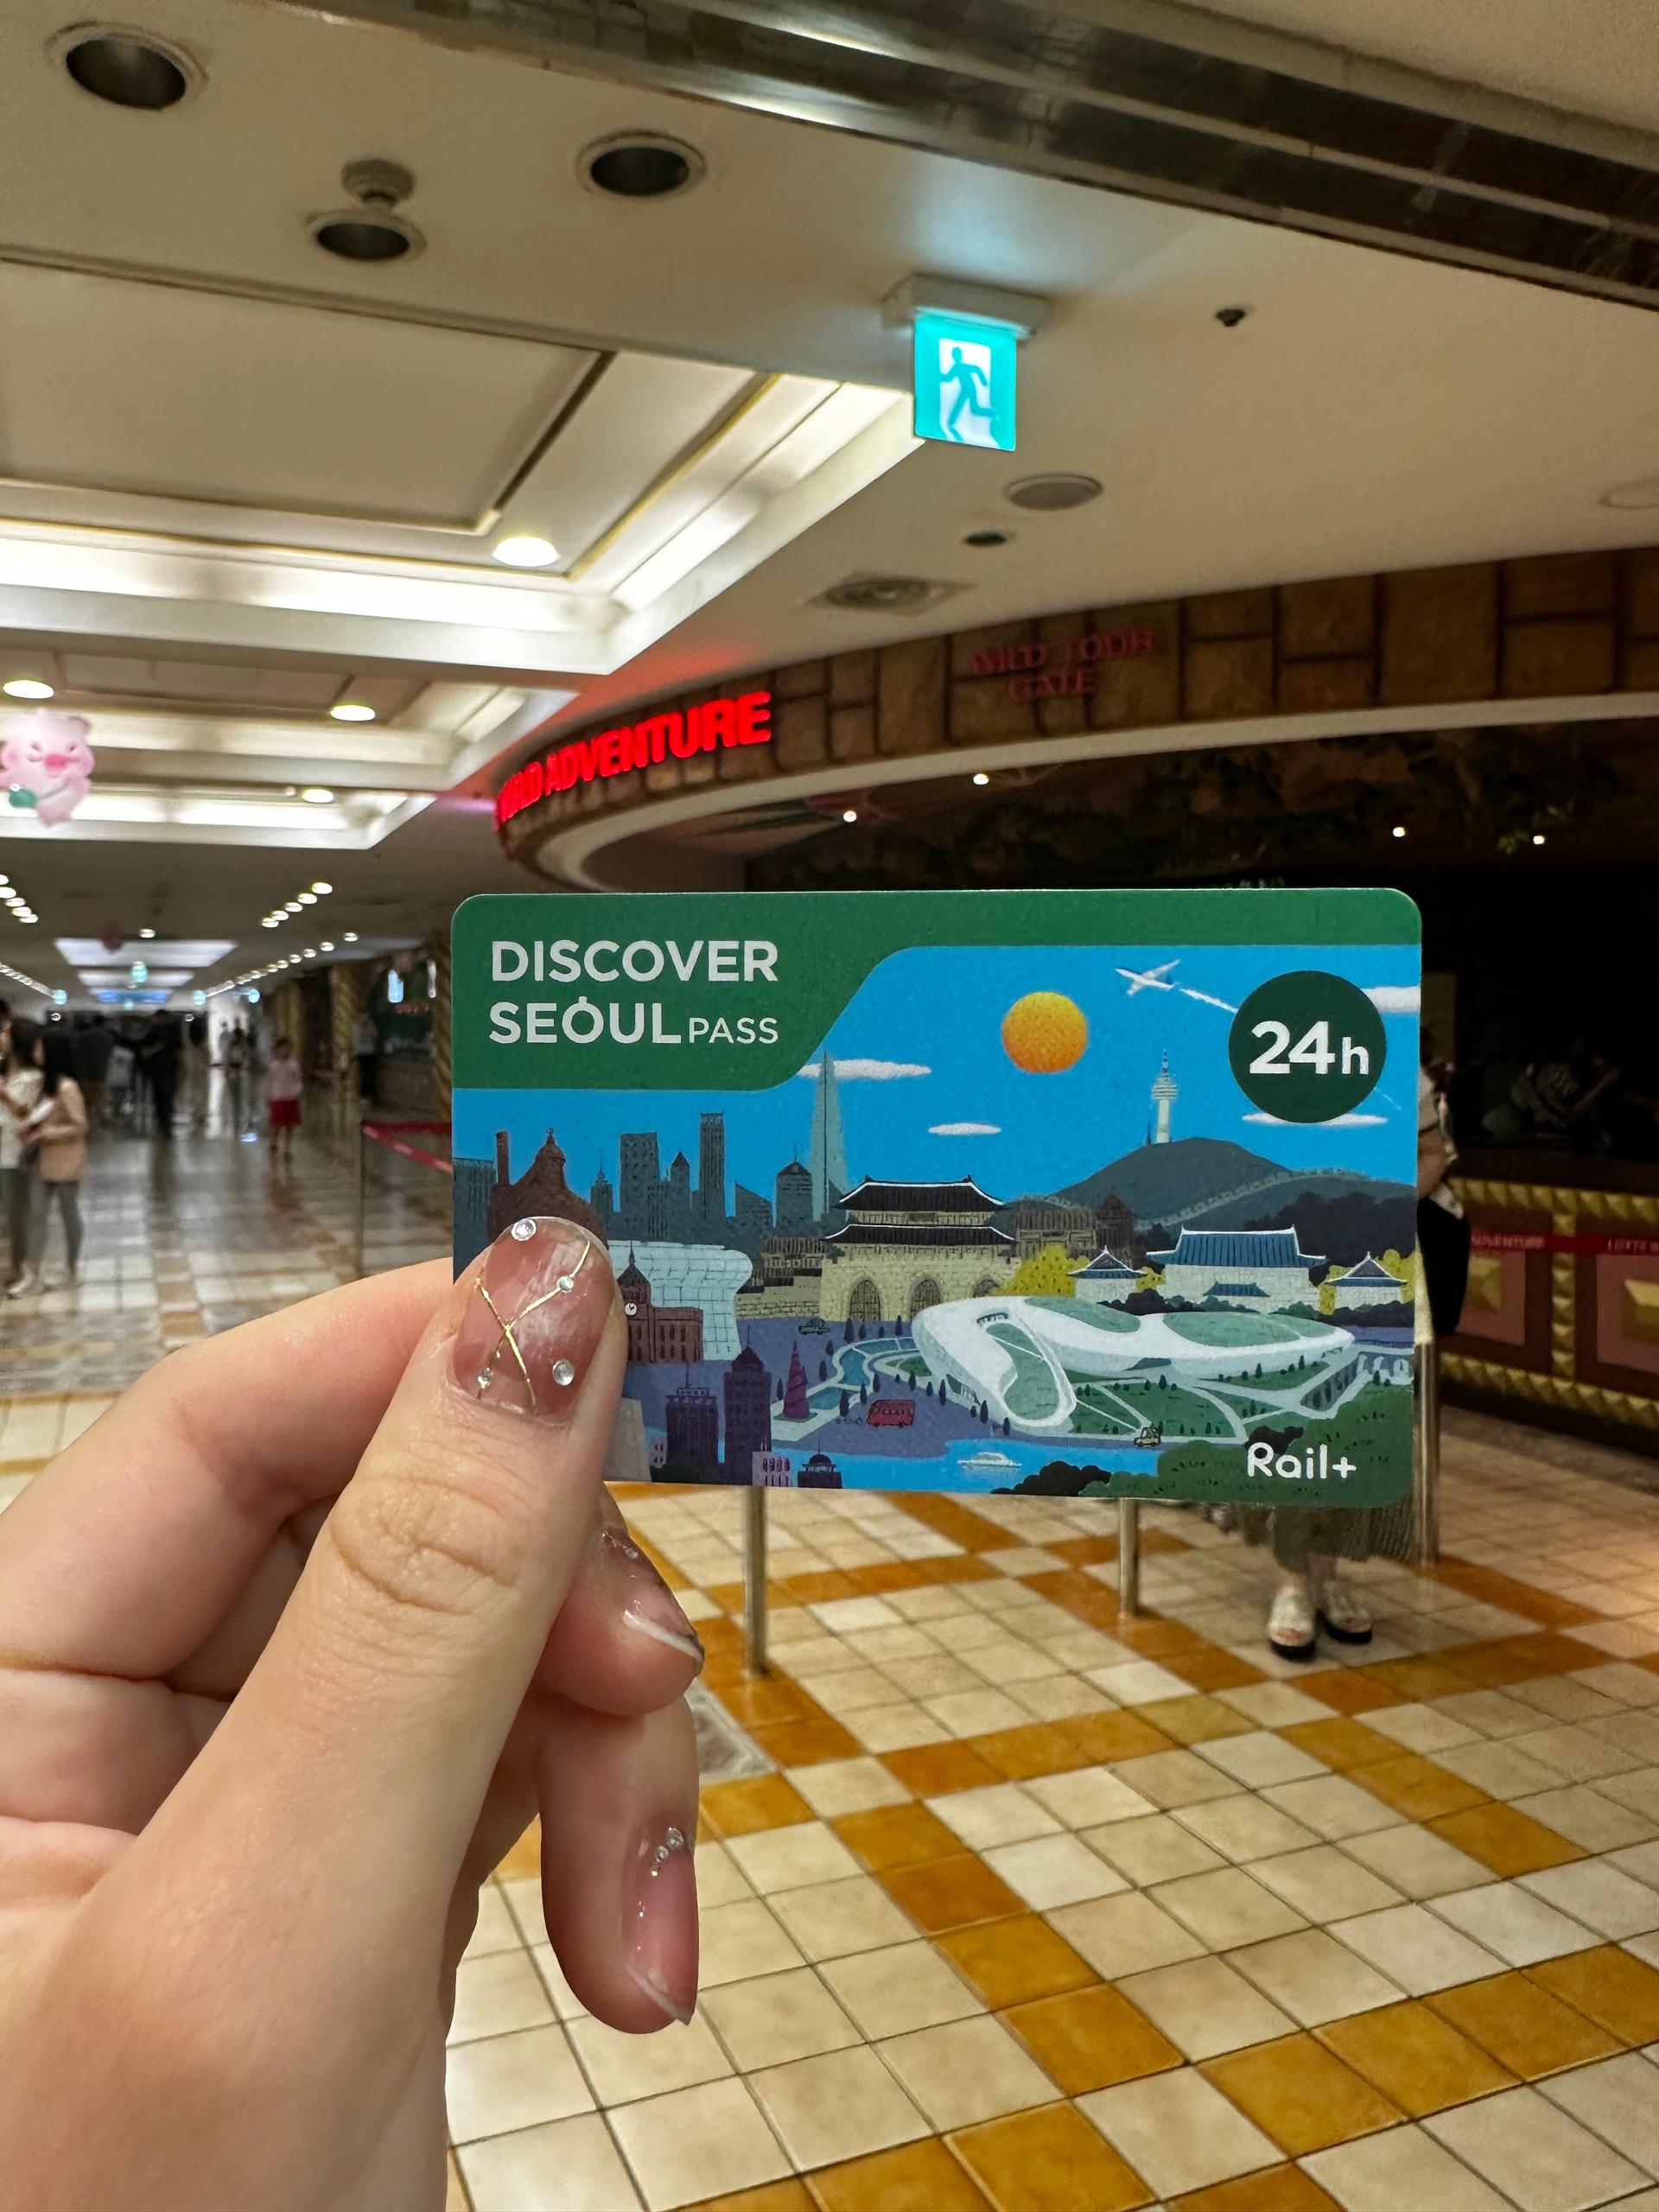 Recommended courses for discovering Seoul with the Seoul Pass at a great value.